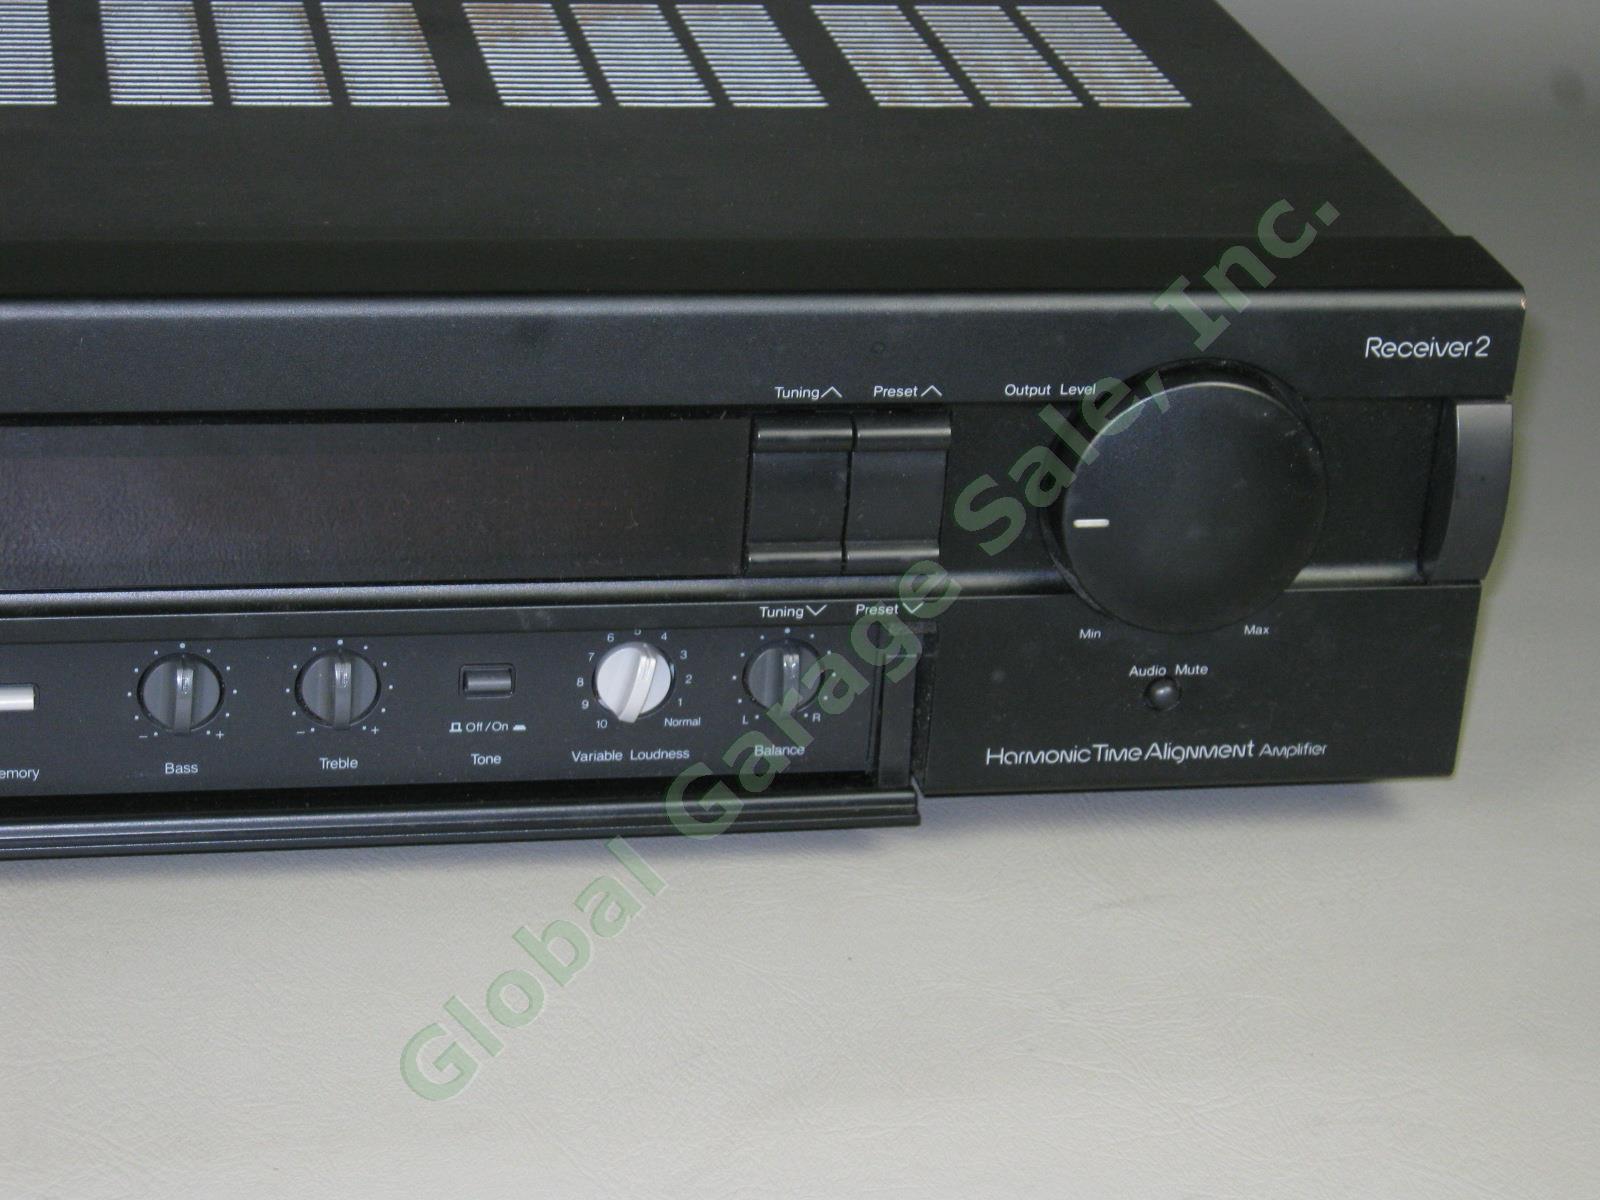 Nakamichi Receiver2 AM/FM Home Stereo Receiver 2 Tuner Amplifier Works Great NR! 2